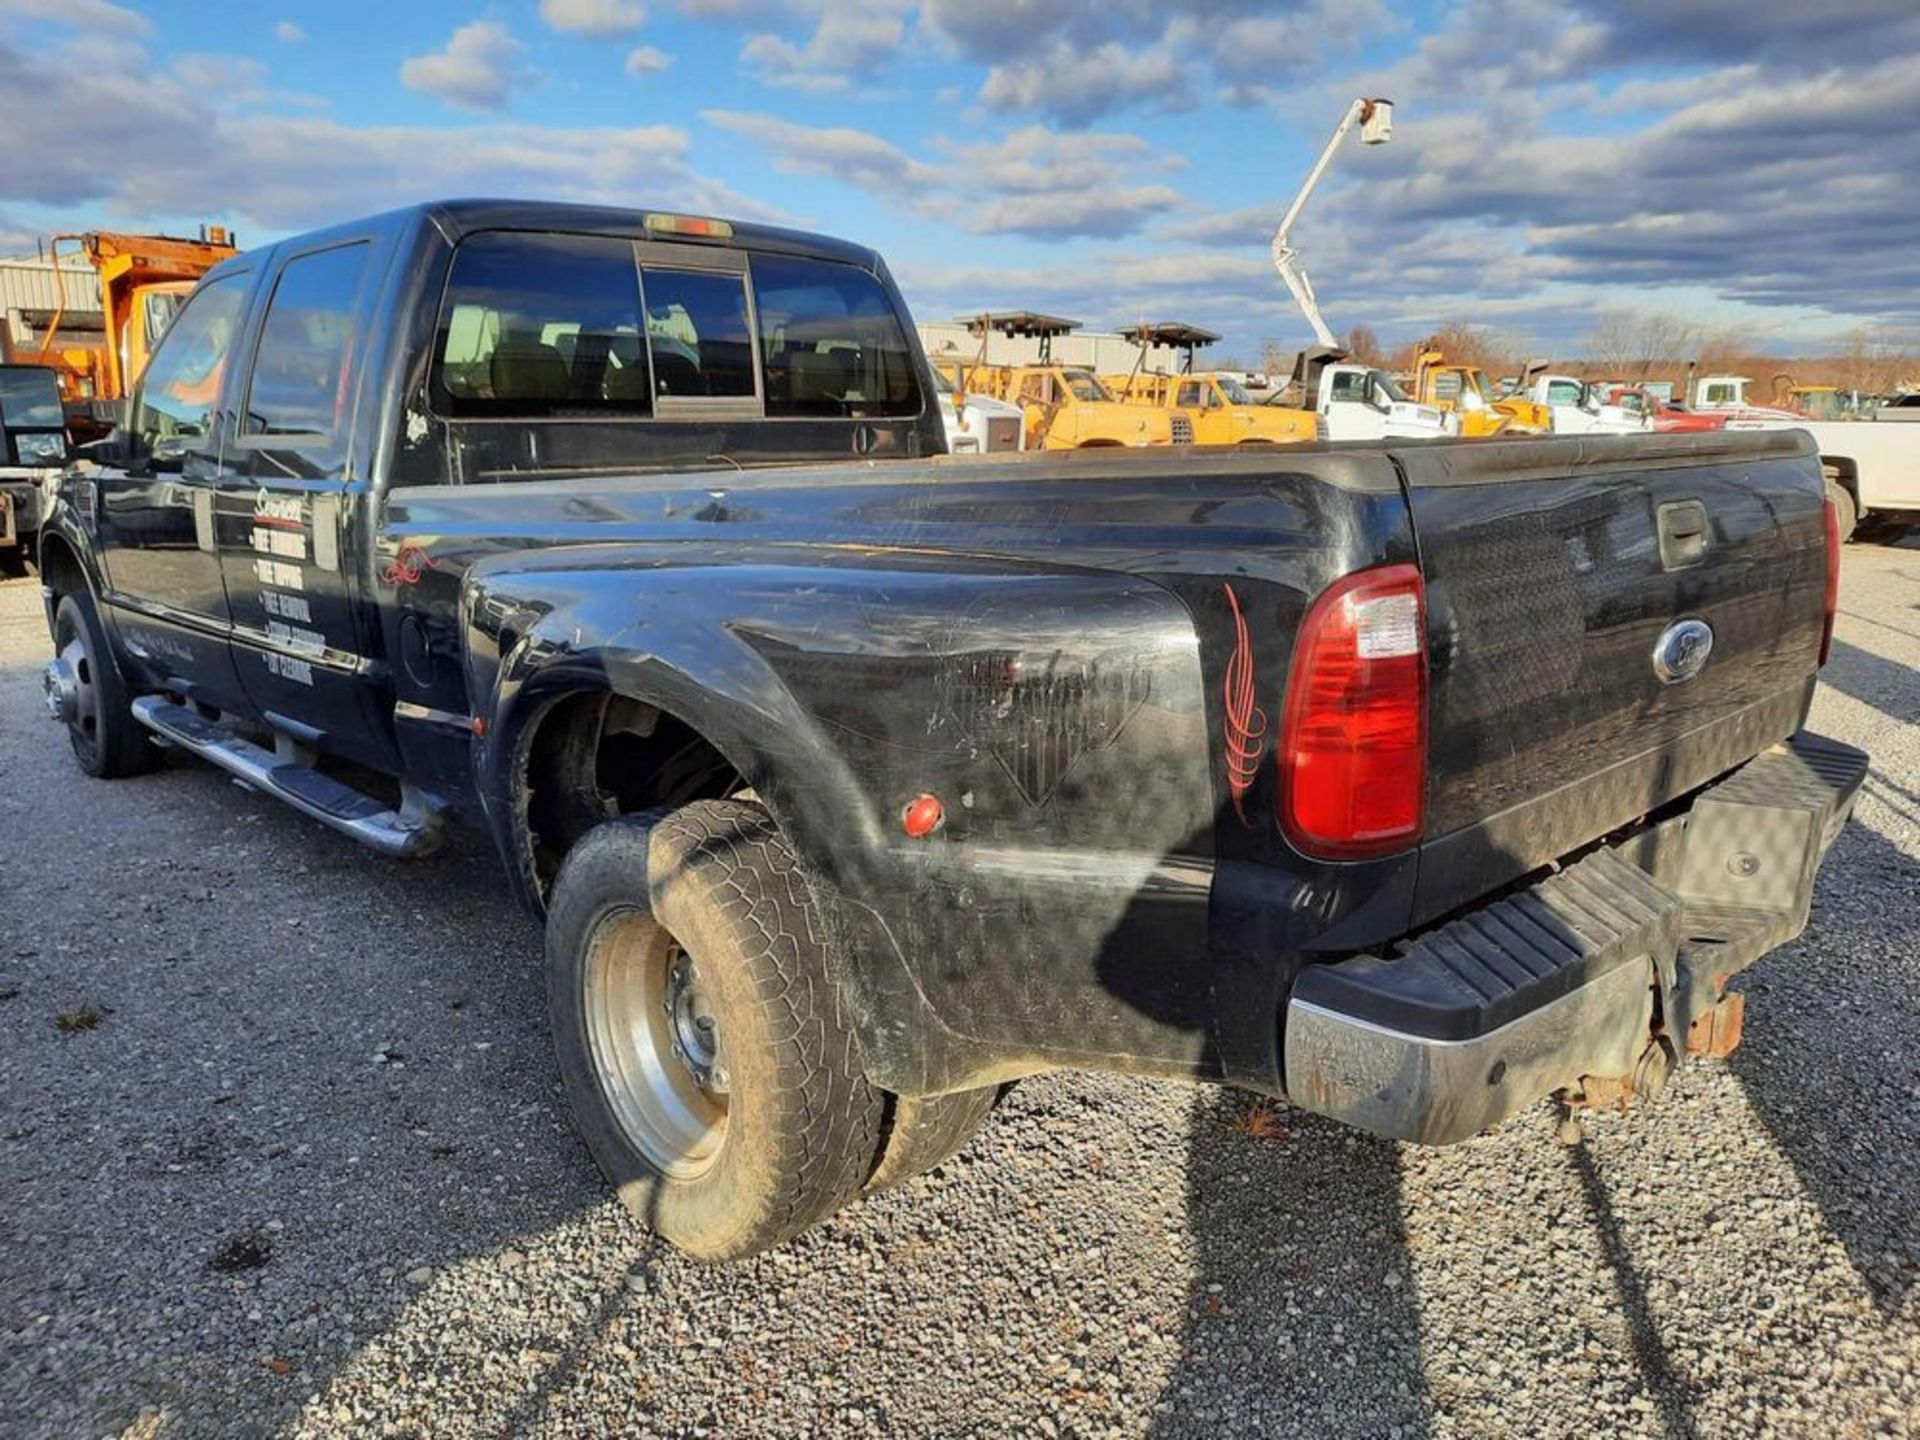 2008 FORD F350 CREW CAB DUALLY PICK UP TRUCK - Image 2 of 5